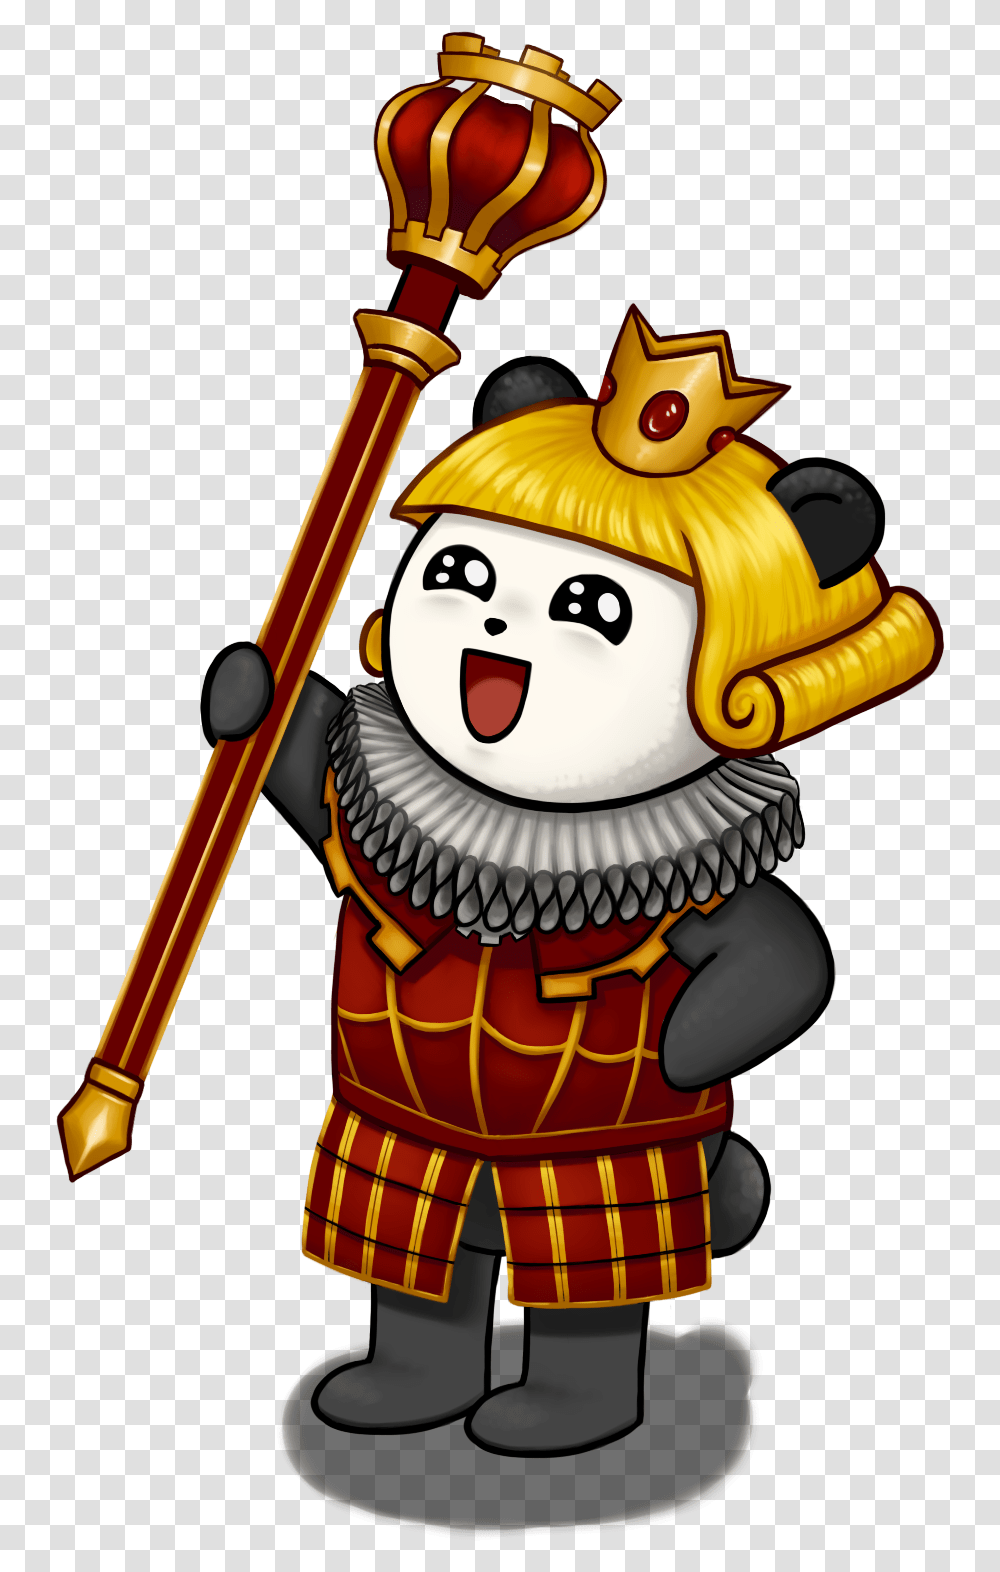 Admiral Bahroos Mascot In Palicos Kaiser Set From I Cartoon, Toy, Knight, Costume, Architecture Transparent Png